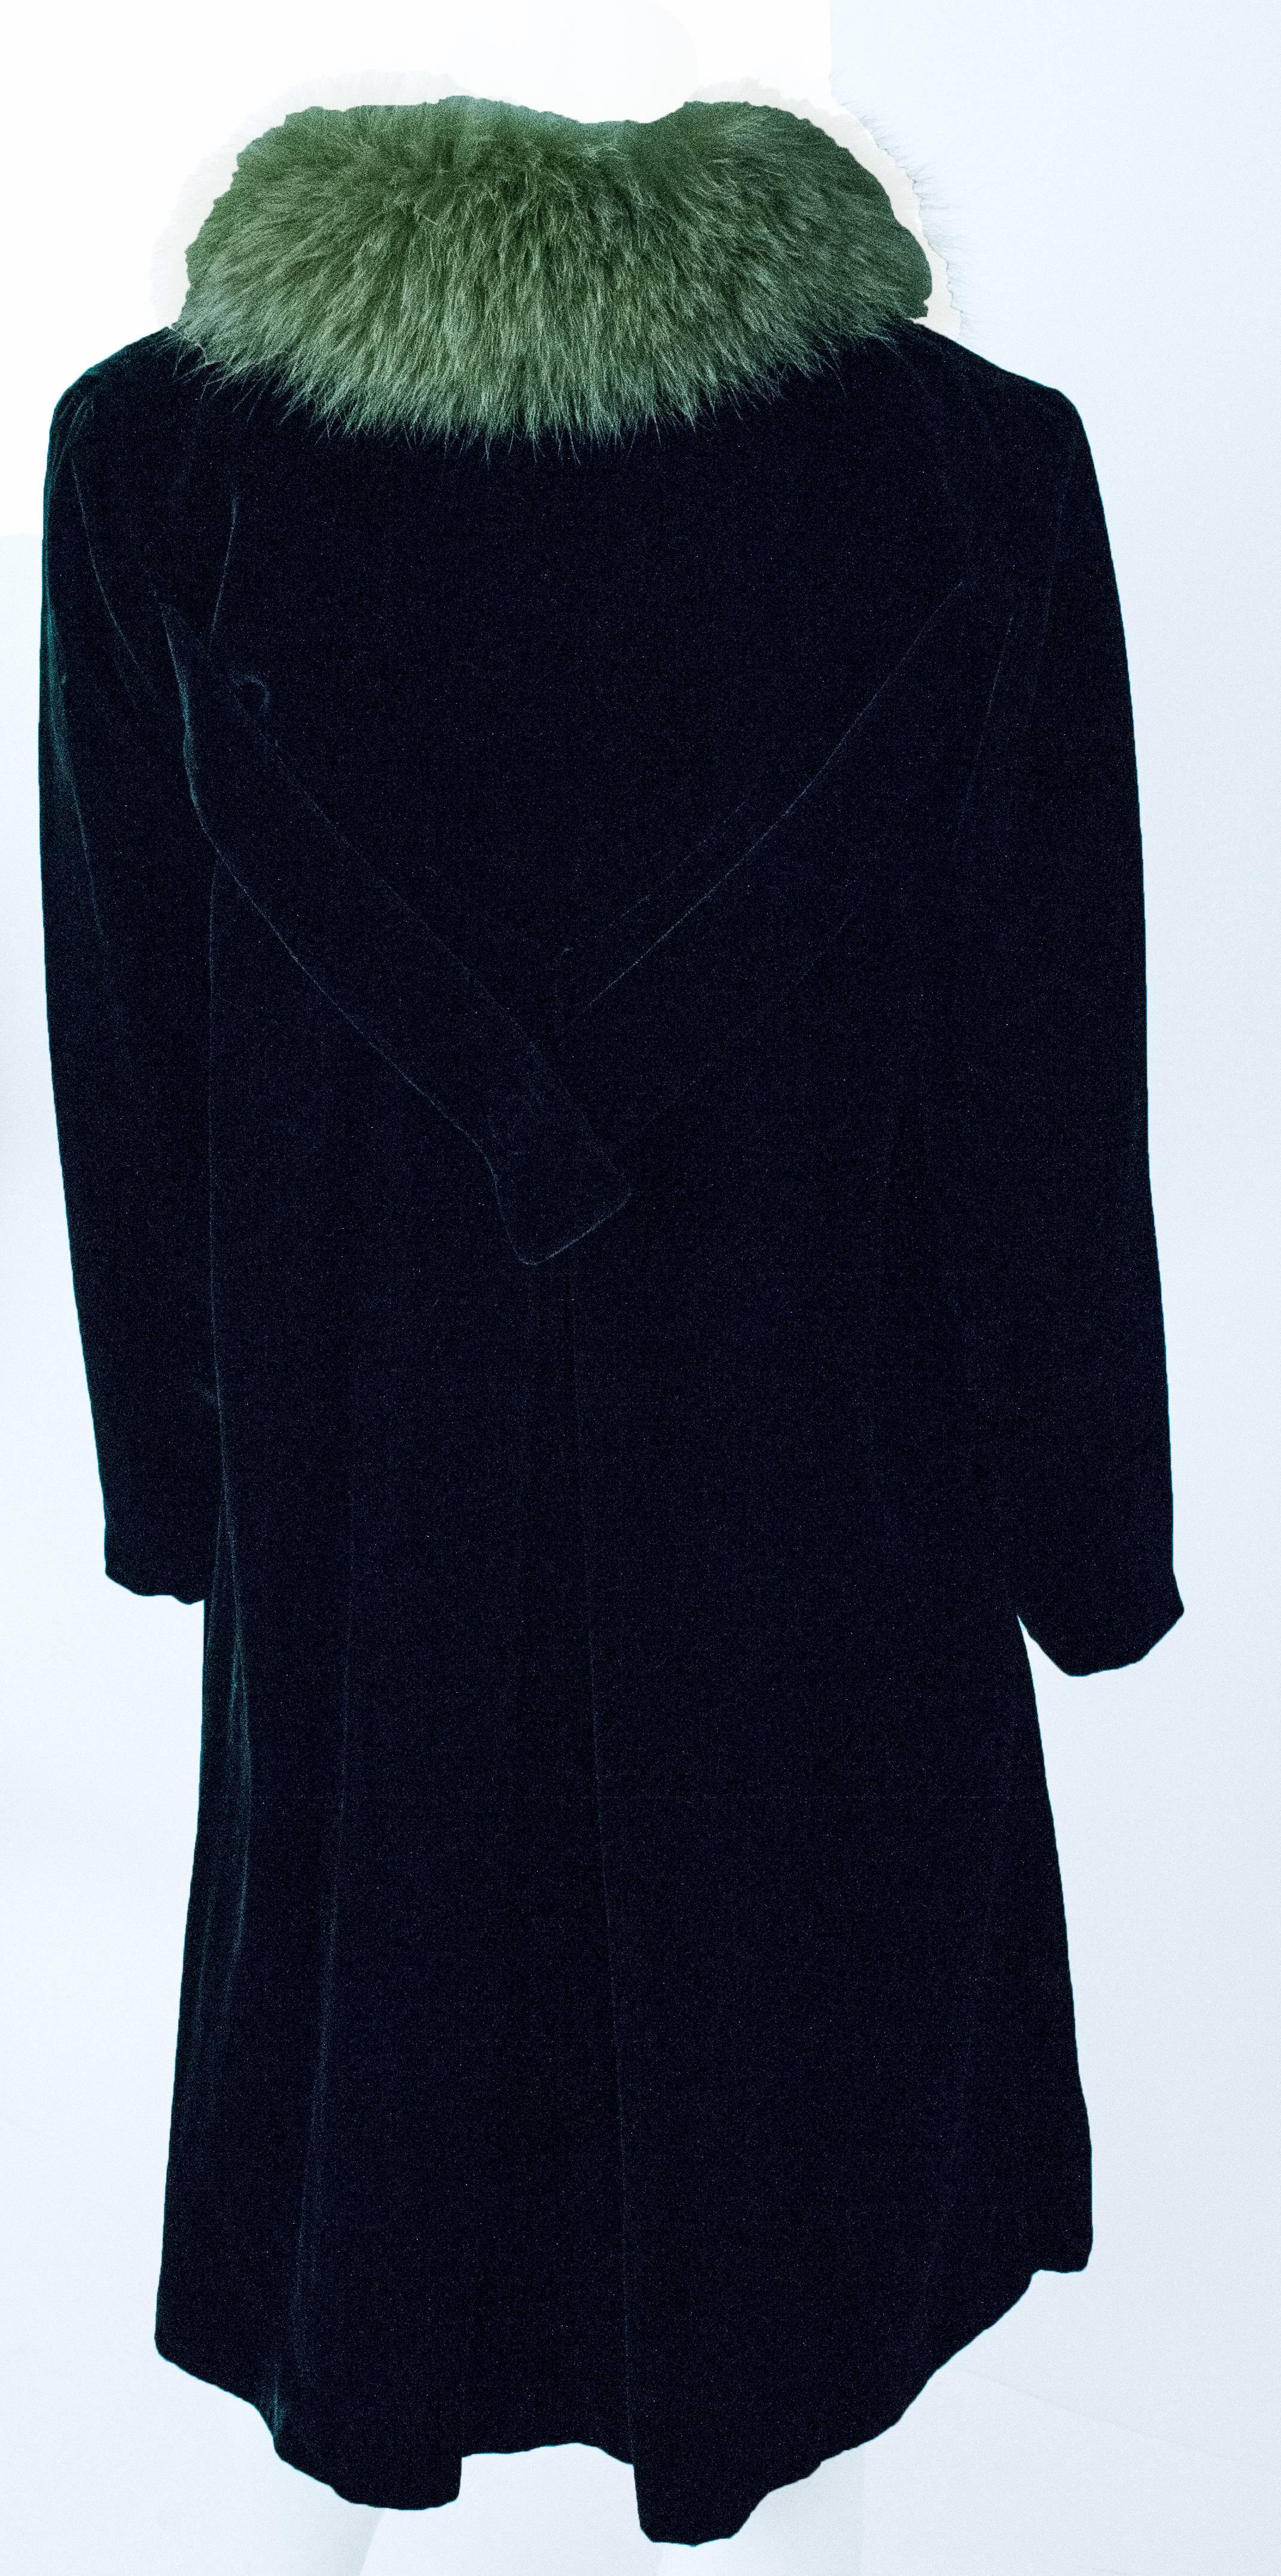 60s Dark Green Velvet Coat with Green Fox Fur Trim. No from closures, no pockets. Size approximately US small. 22